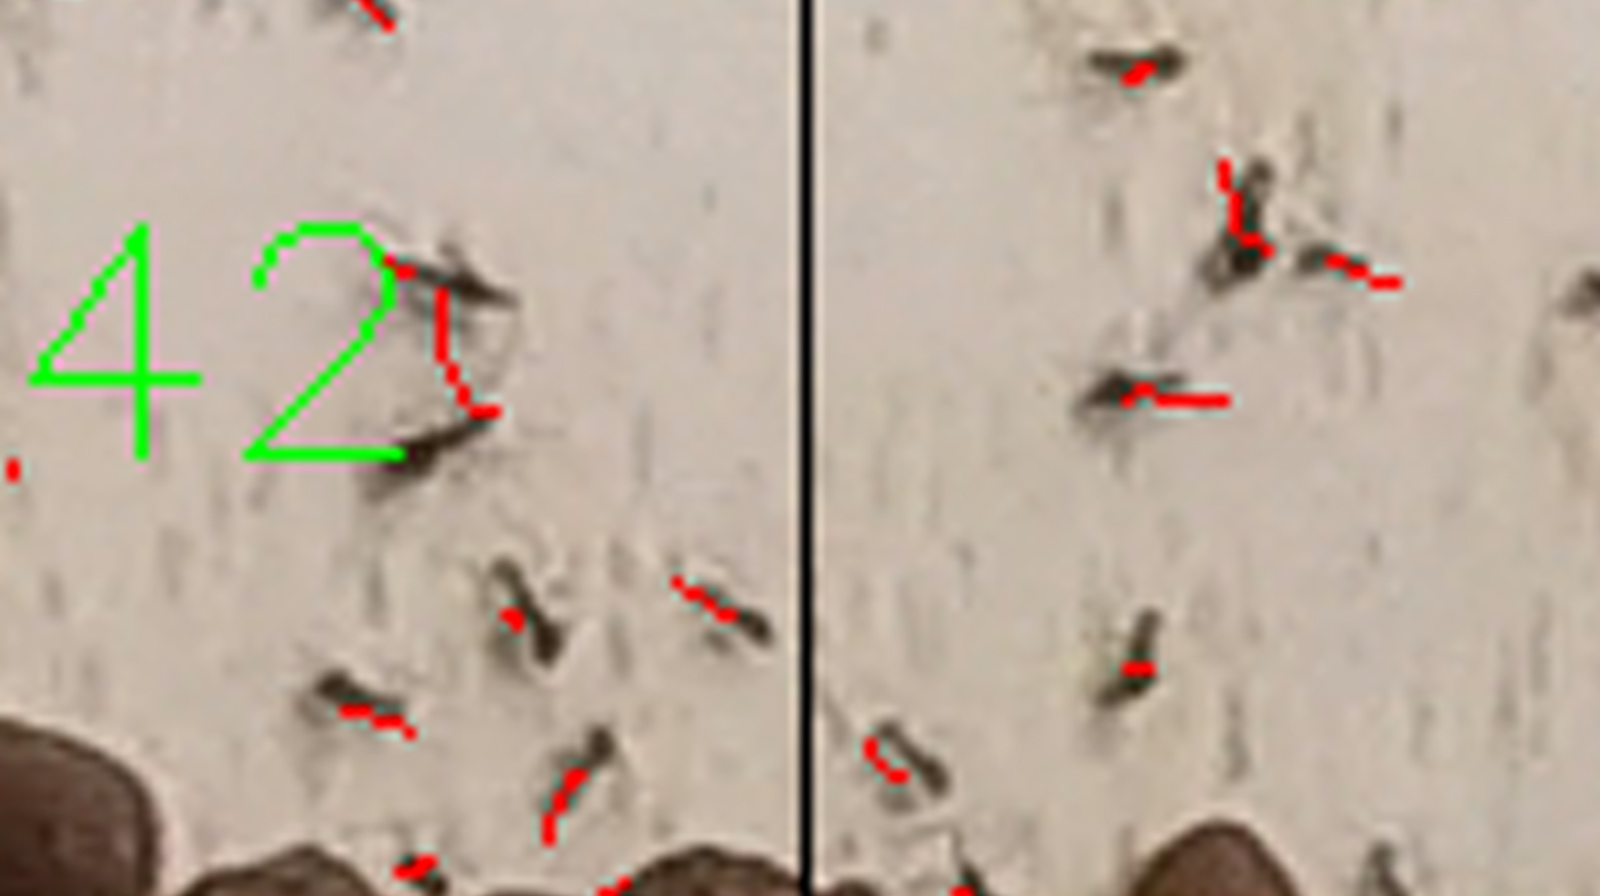 Ant tracking via machine learning